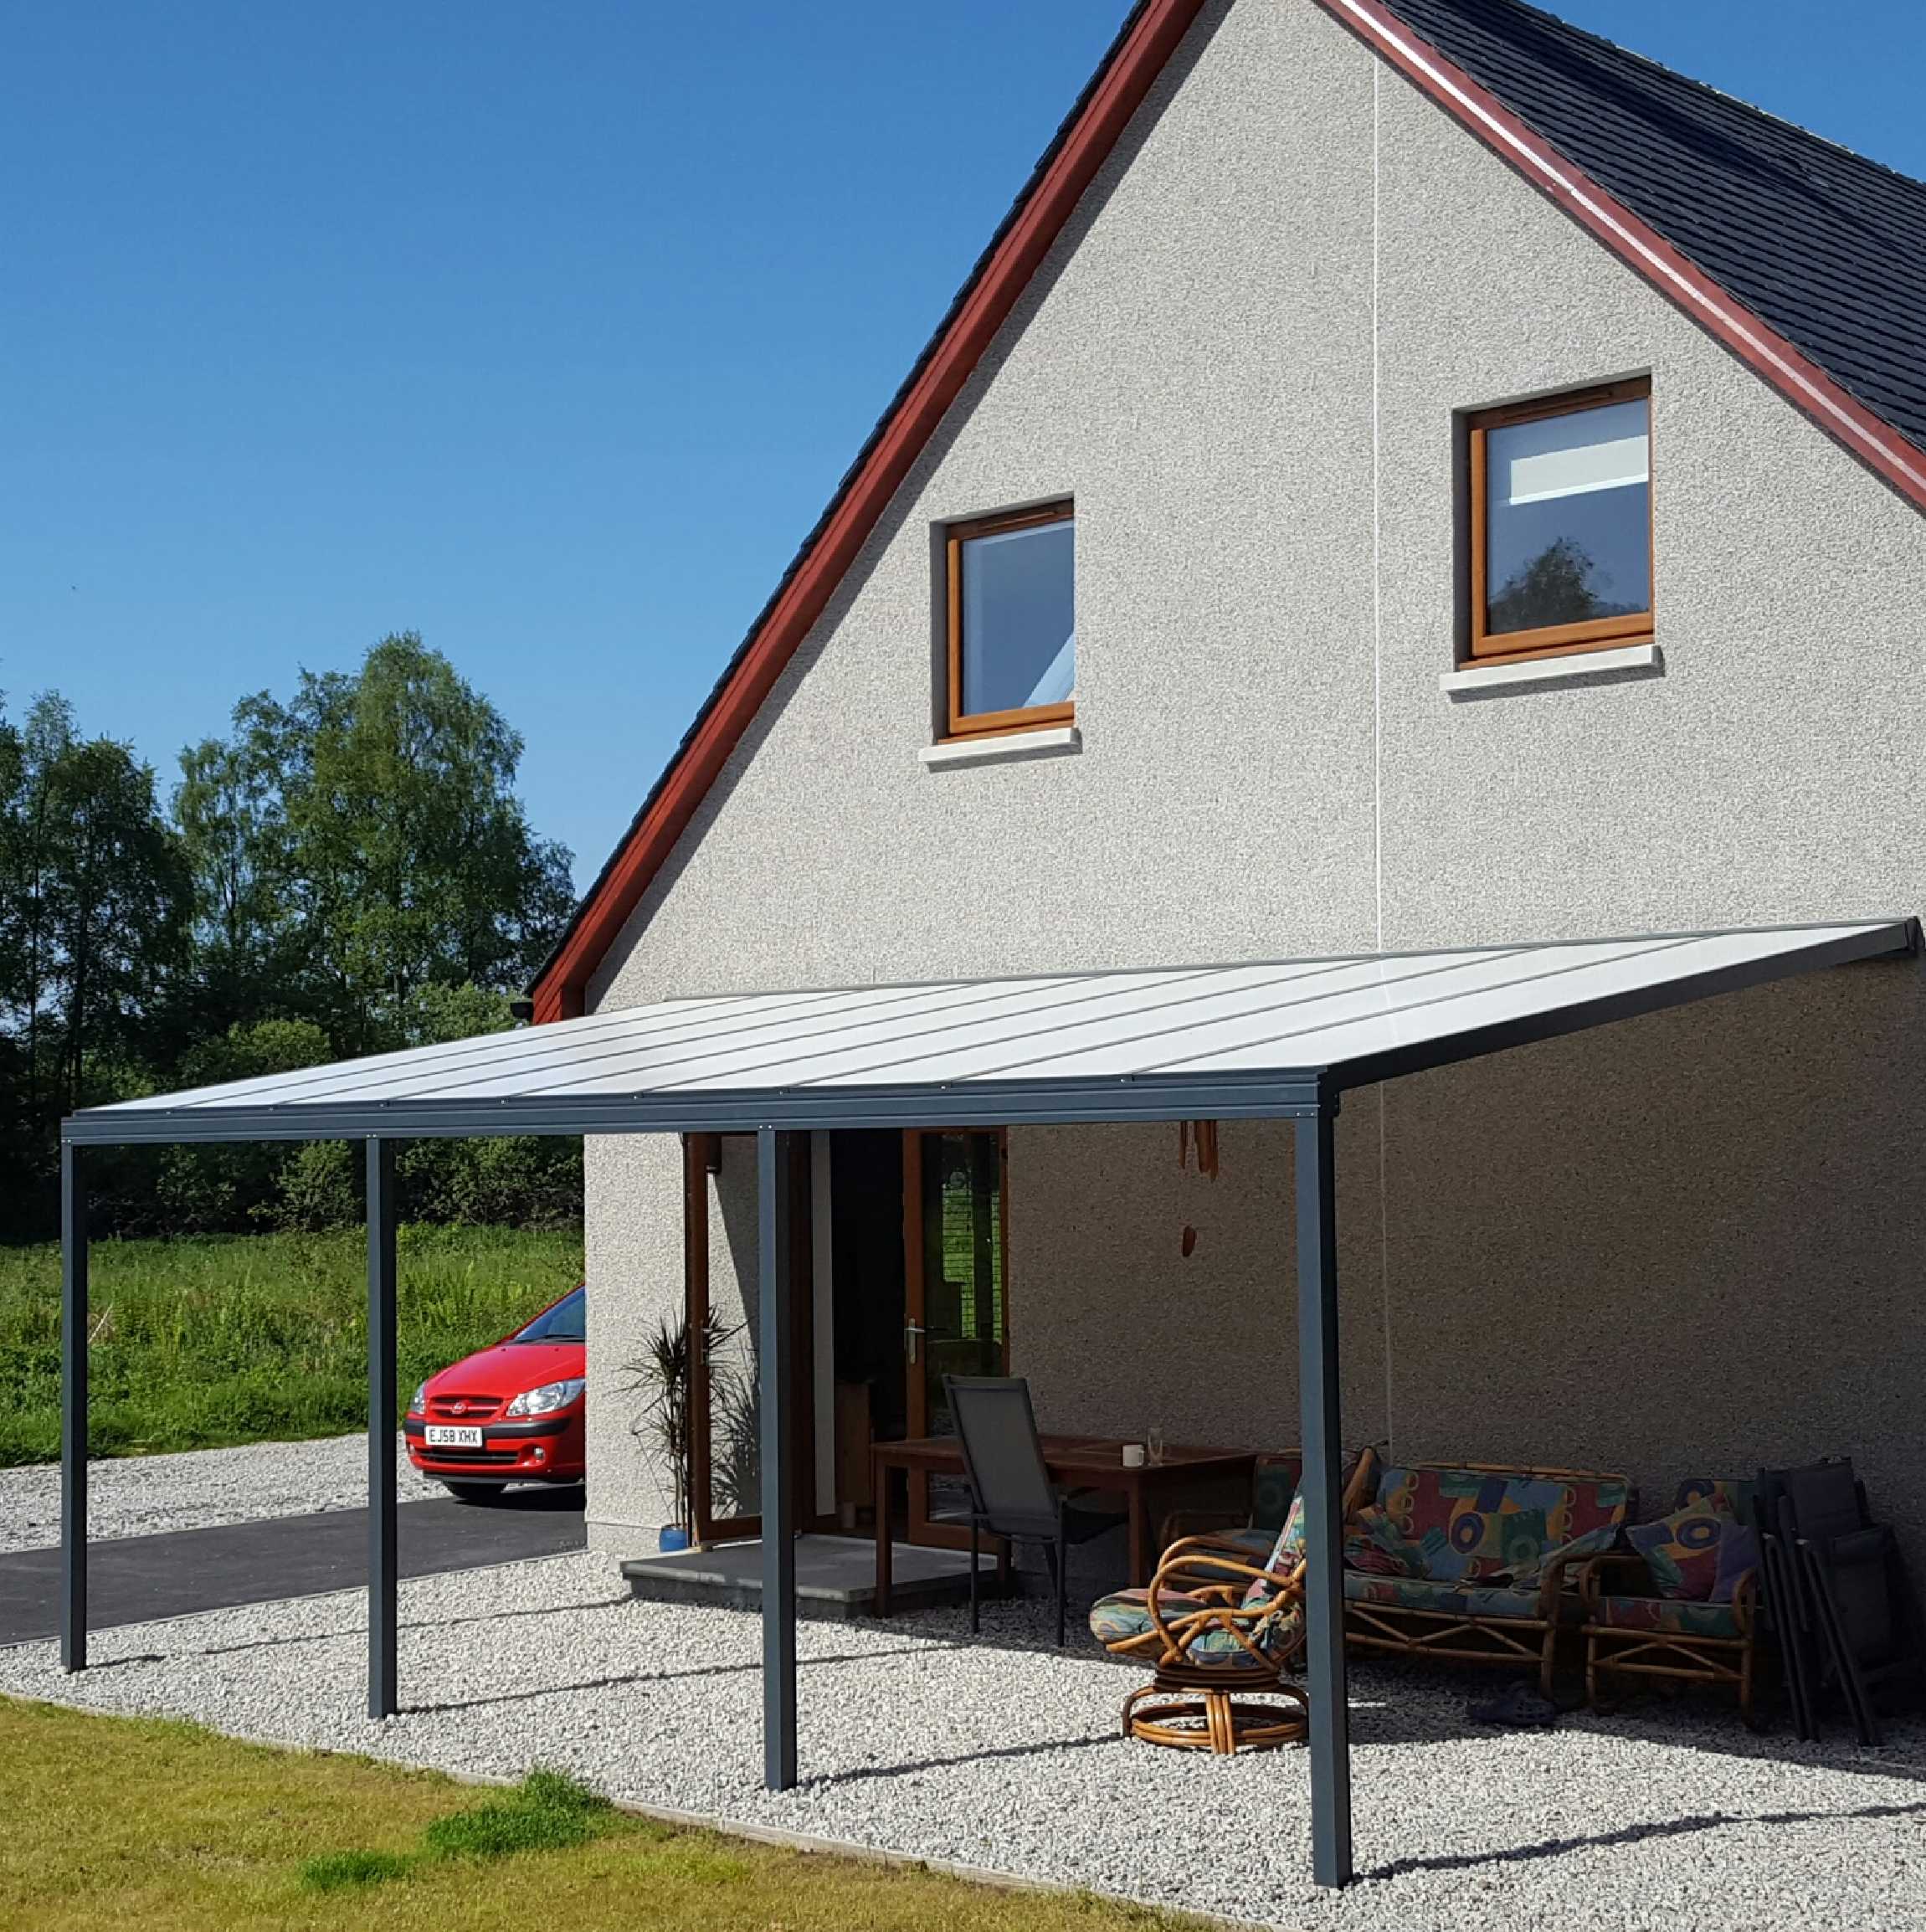 Great selection of SPECIAL OFFER Omega Smart Lean-To Canopy, Anthracite Grey, 16mm Polycarbonate Glazing - 2.5m (W) x 2.0m (P), (2) Supporting Posts